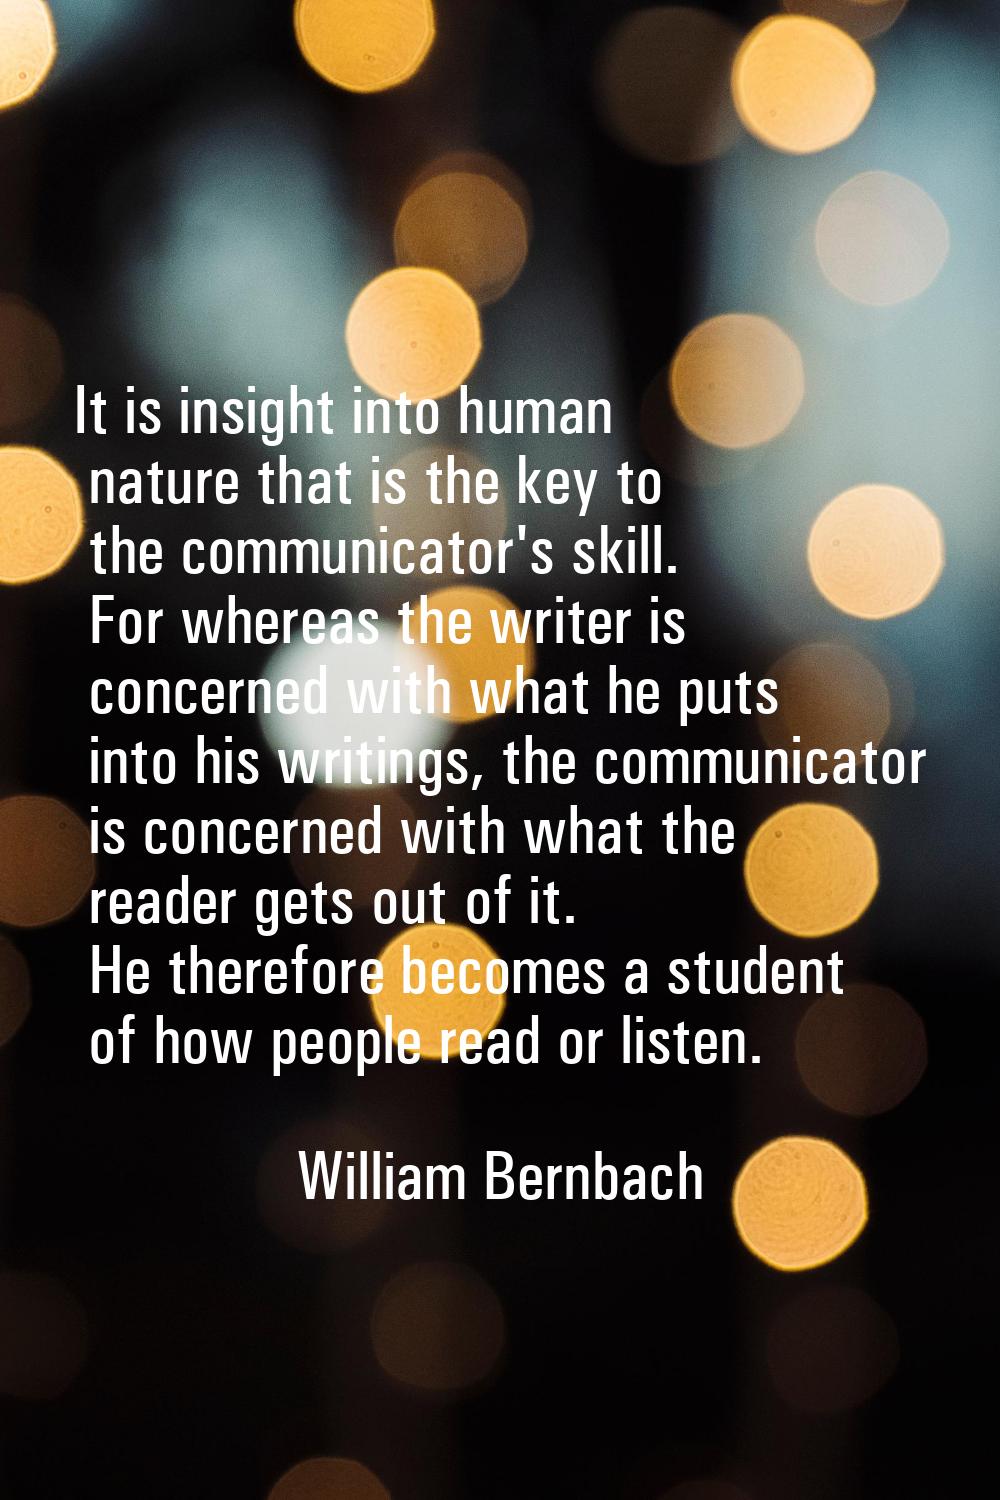 It is insight into human nature that is the key to the communicator's skill. For whereas the writer